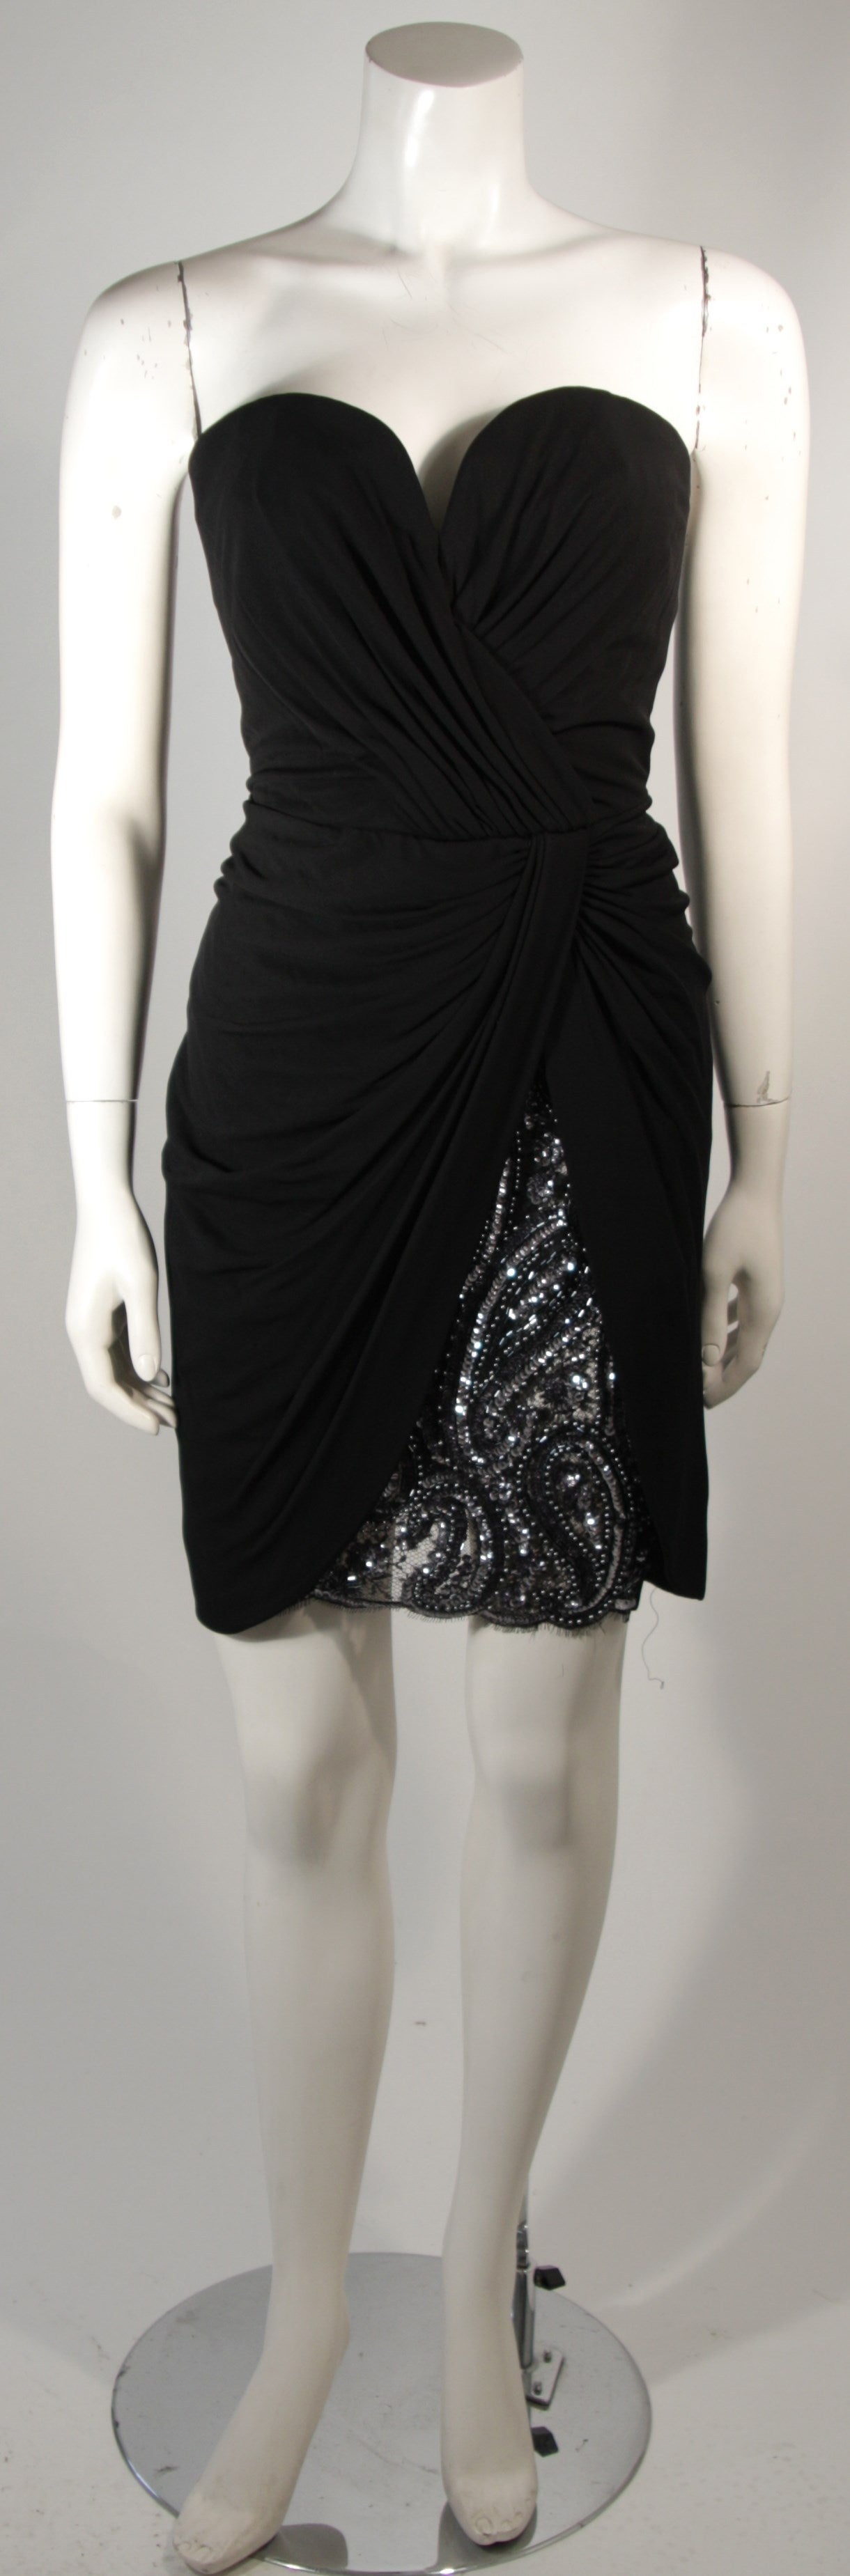 This Vicky Tiel cocktail dress is composed of a black viscose and rayon blend jersey. There are gathers throughout and a sequin detail (silver and black) at the hem. The bodice features boning for structure and a side zipper closure for ease of